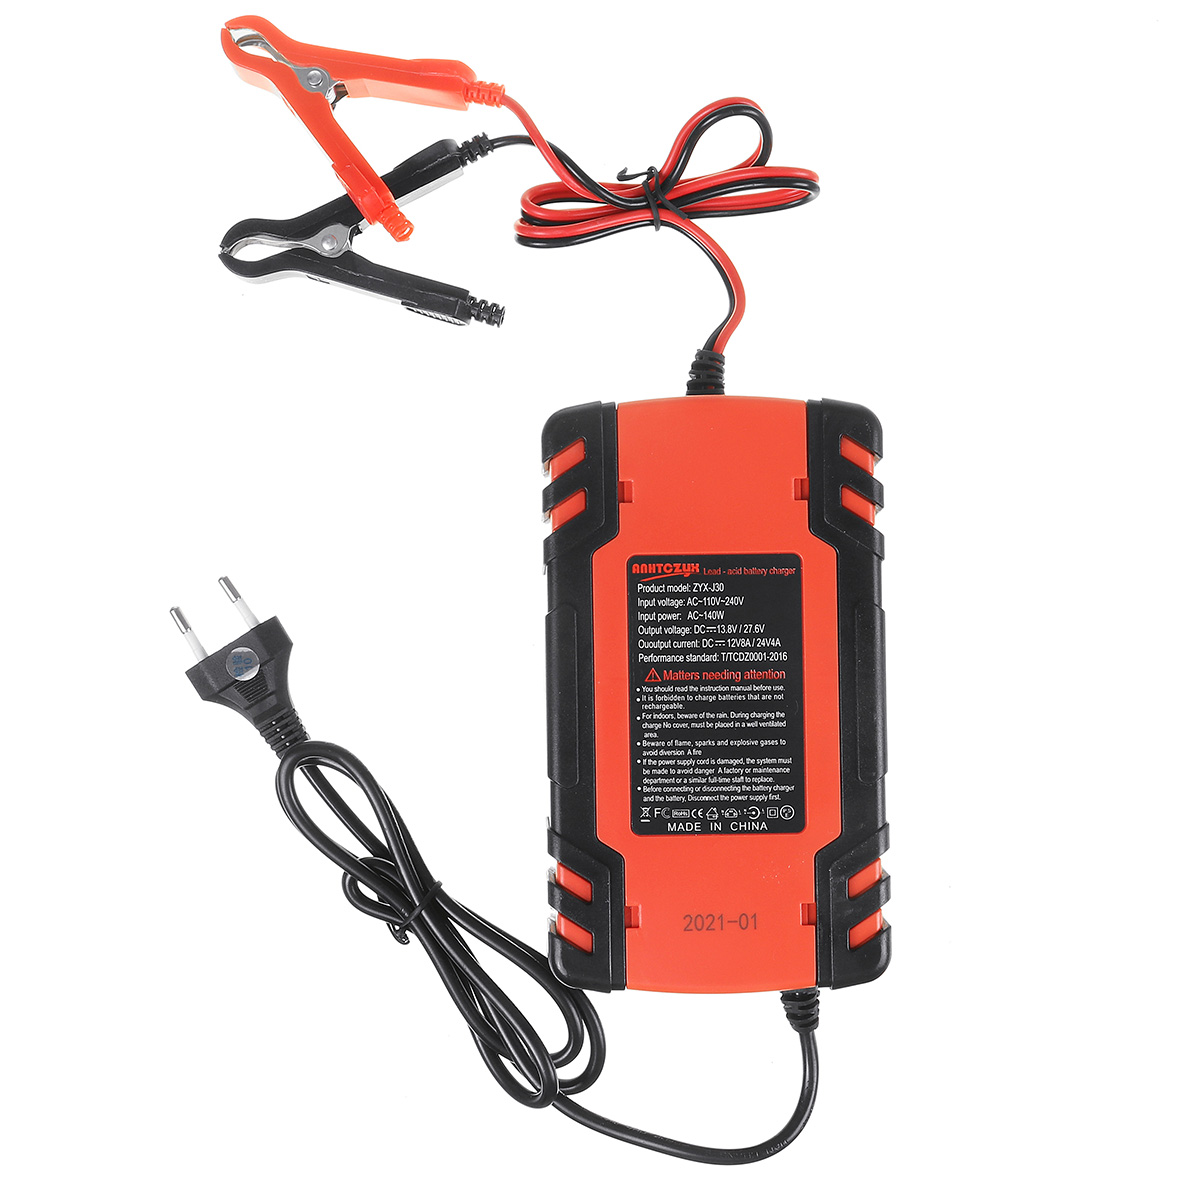 Enusic™ 12/24V 8A Red Touch Screen Pulse Repair LCD Battery Charger for Car Motorcycle Lead Acid Battery Agm Gel Wet